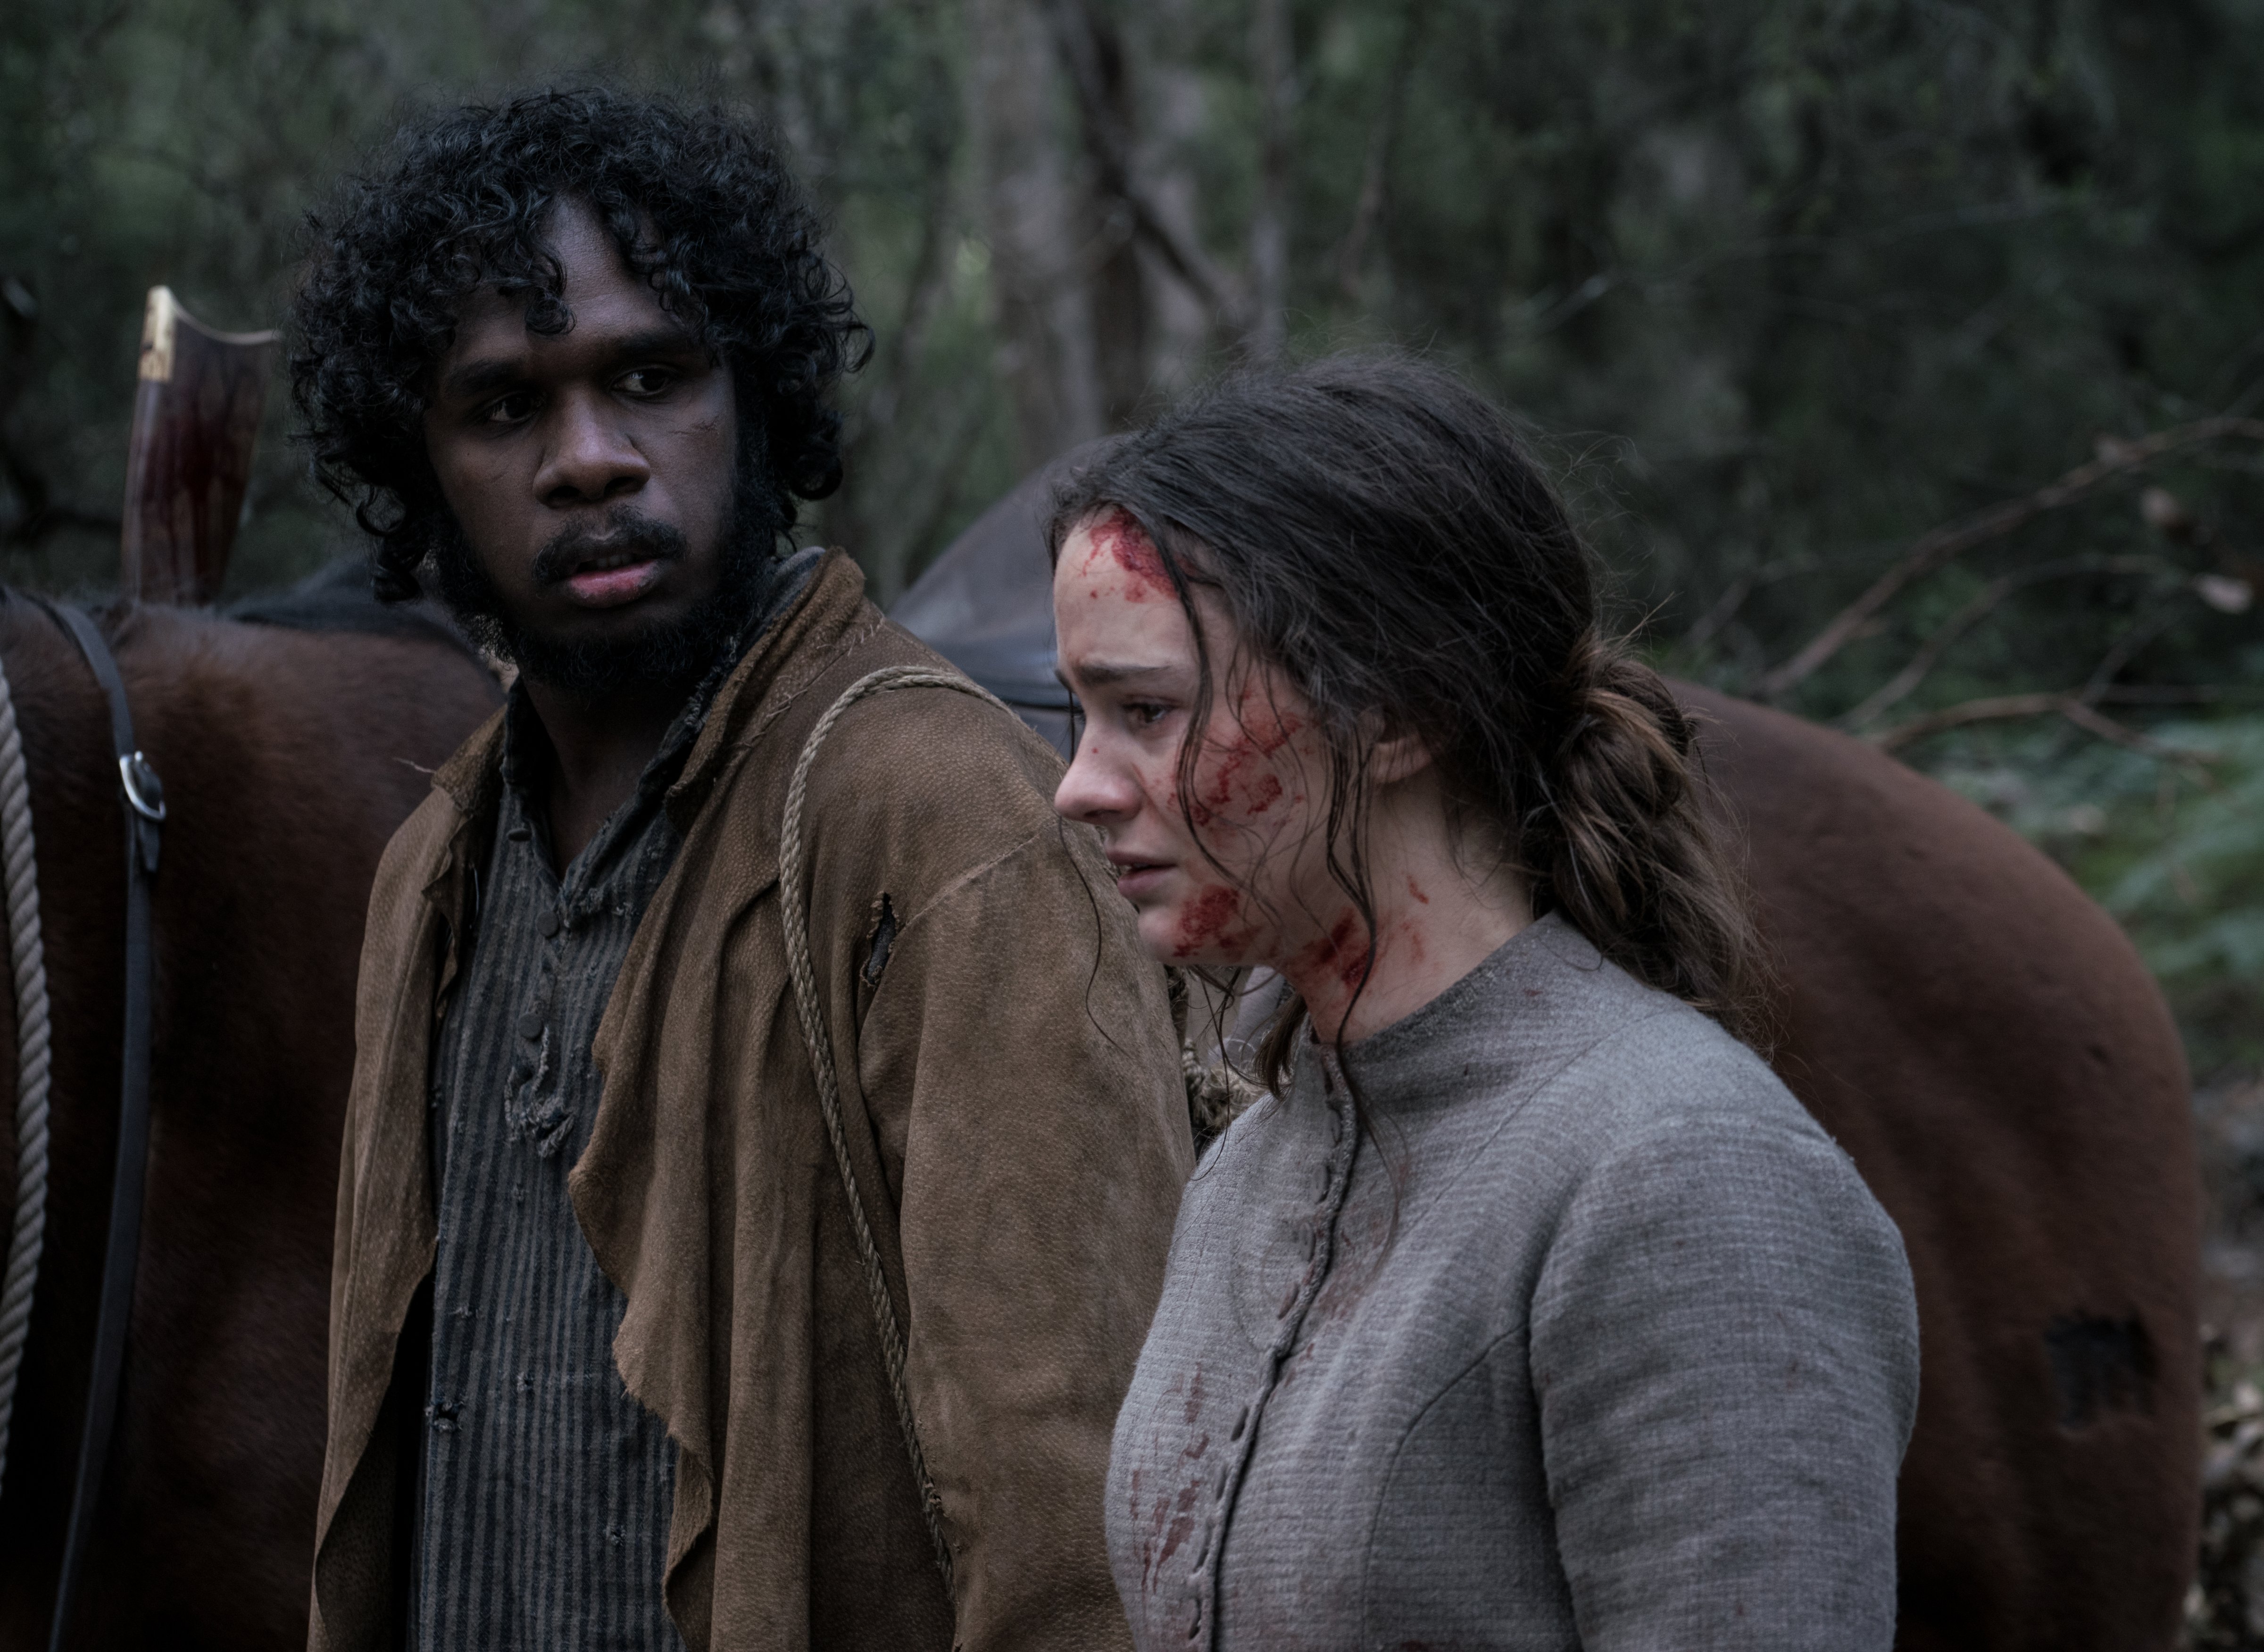 Baykali Ganambarr as “Billy” and Aisling Franciosi as “Clare” in Jennifer Kent’s The Nightingale. Courtesy of IFC Films. An IFC Films release. (Baykali Ganambarr as “Billy” and Aisling Franciosi as “Clare” in Jennifer Kent’s The Nightingale. Courtesy of IFC Films. An IFC Films release.)